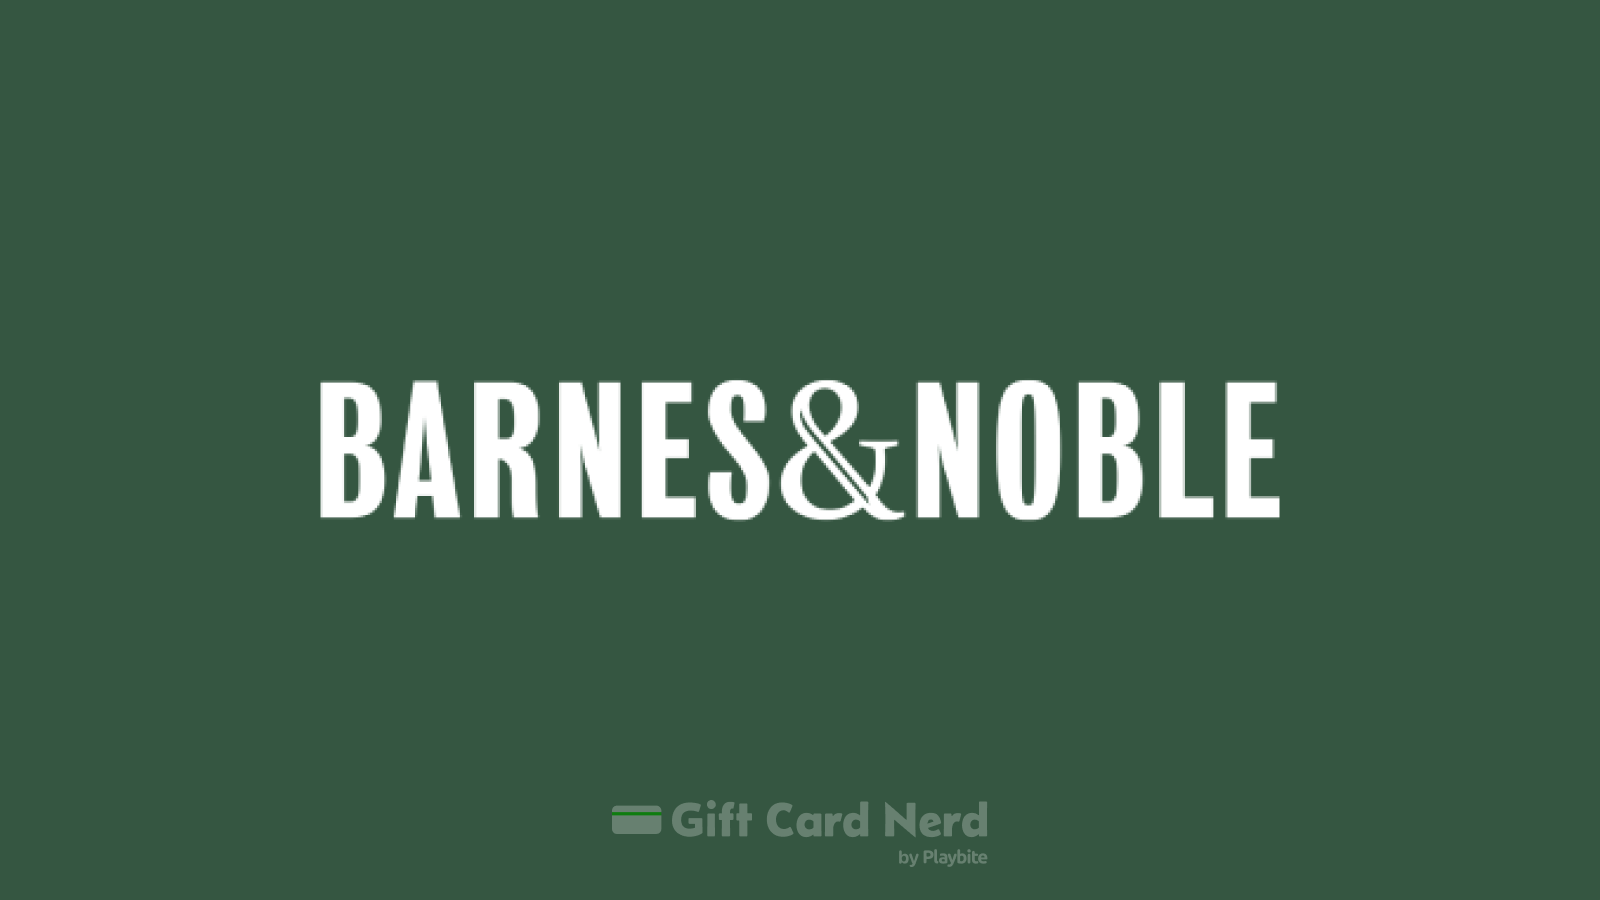 Can You Buy Barnes and Noble Gift Cards at CVS?